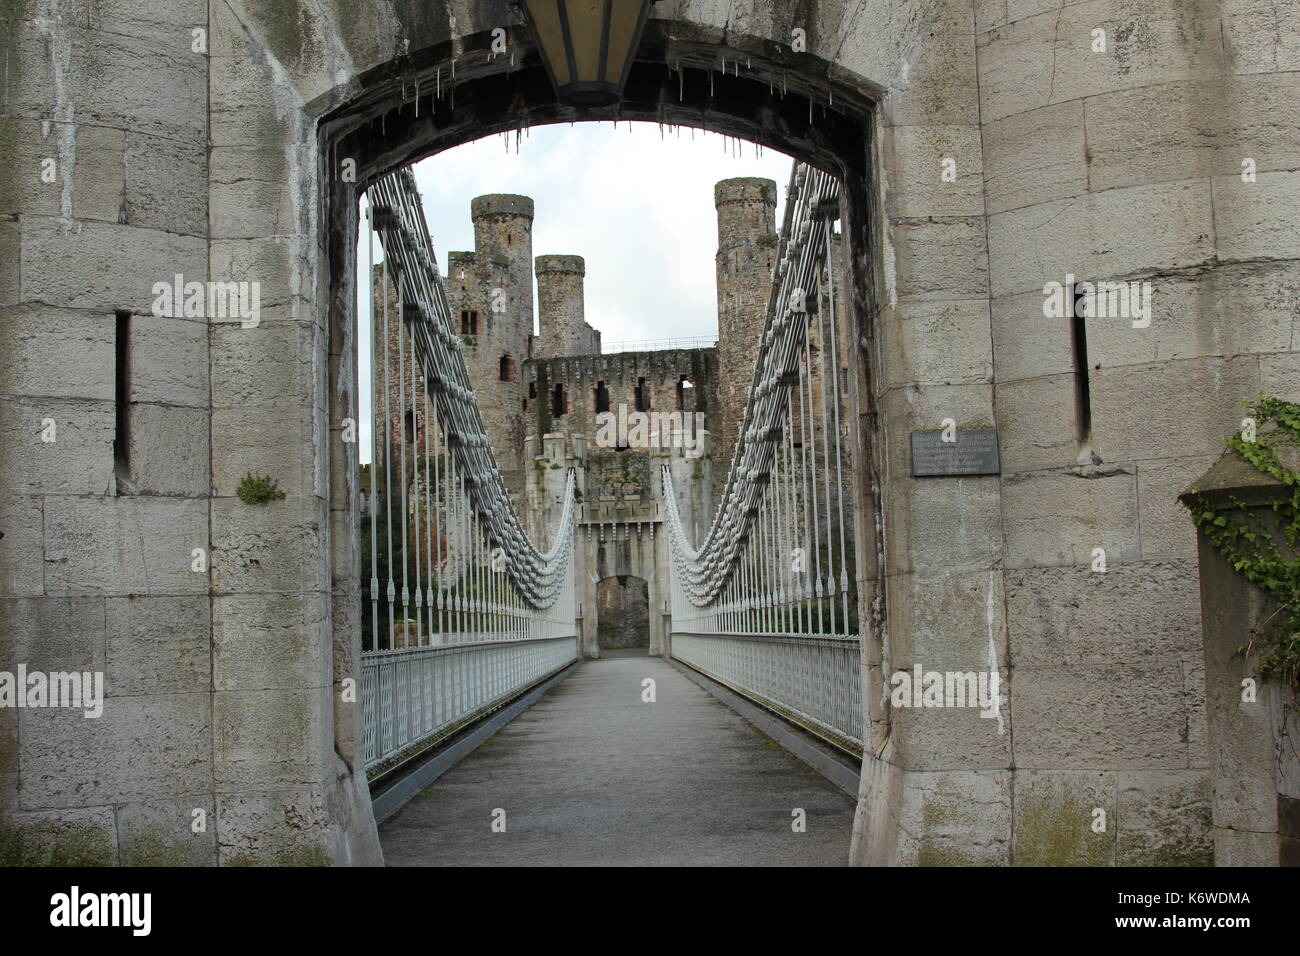 Conwy suspension bridge in wales. Built by Thomas Telford in 1822-26 Stock Photo